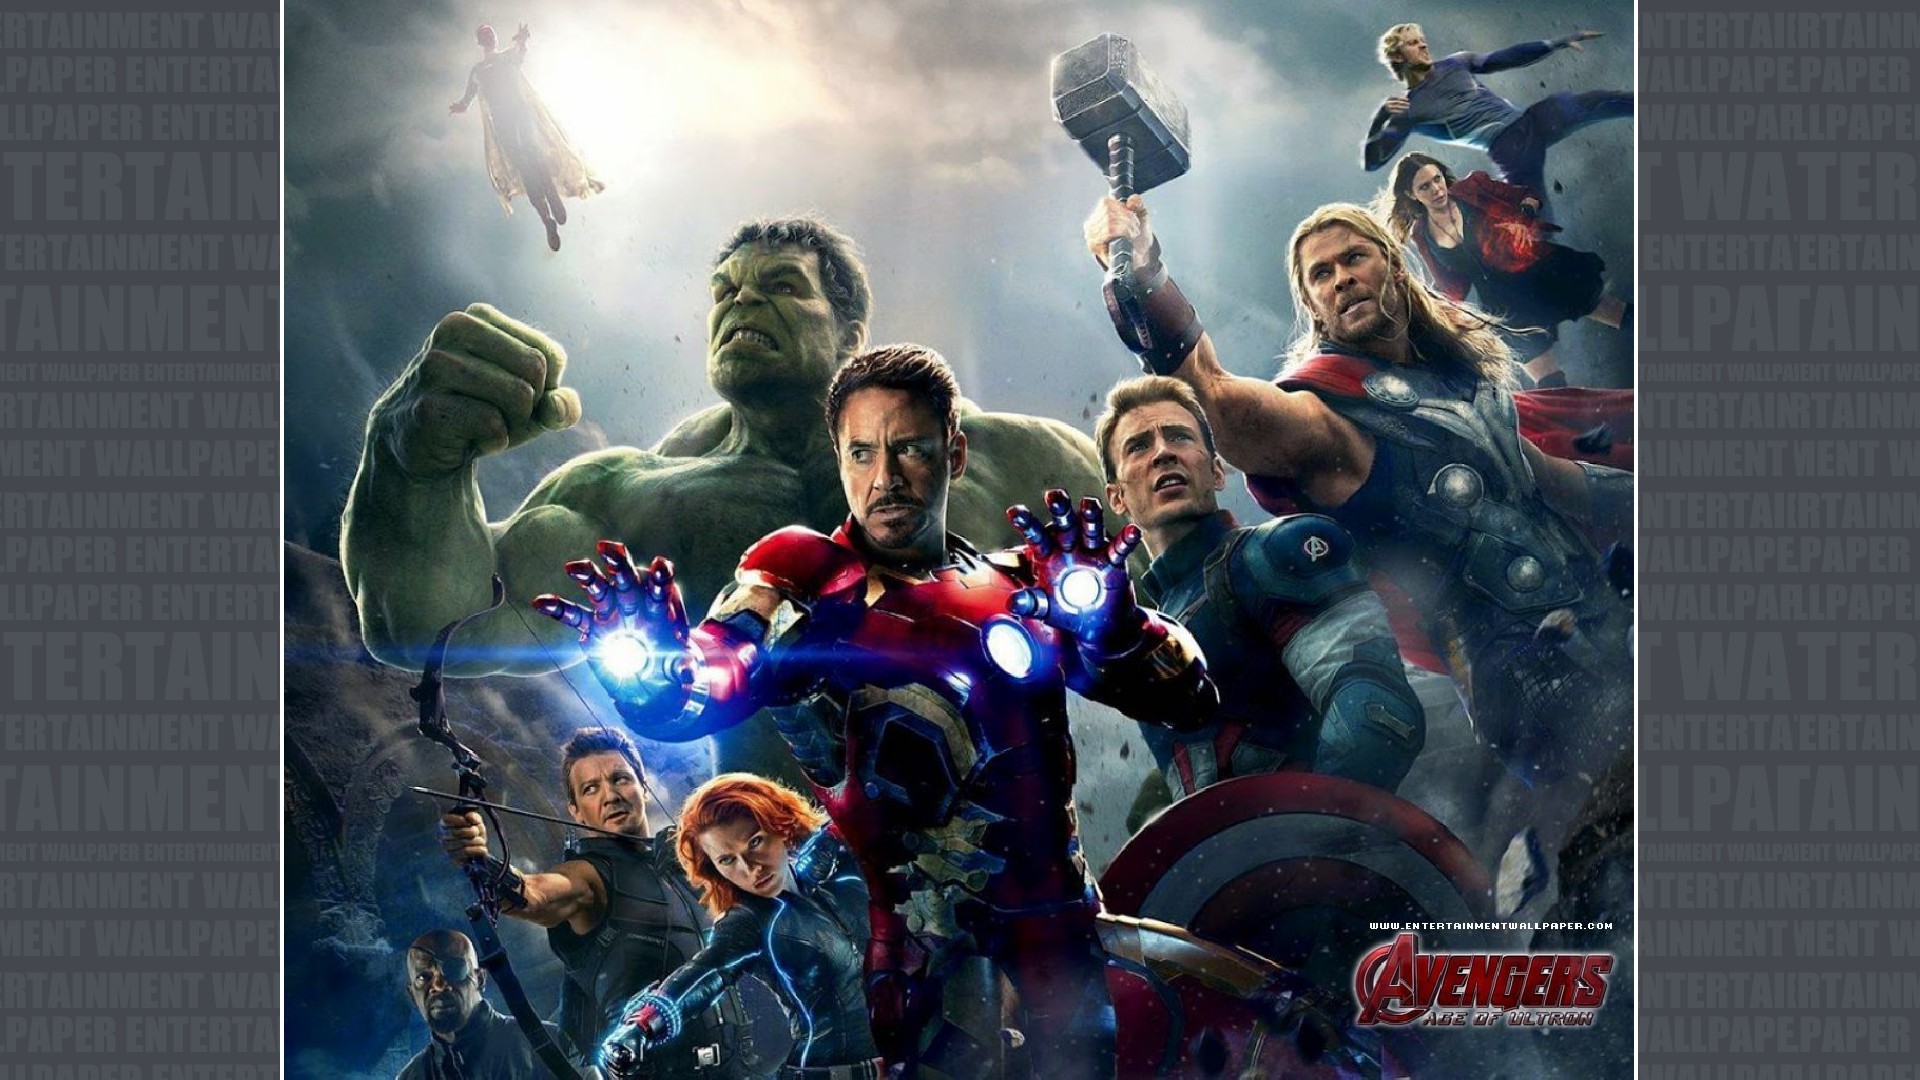 Avengers Age of Ultron Wallpaper – Original size, download now